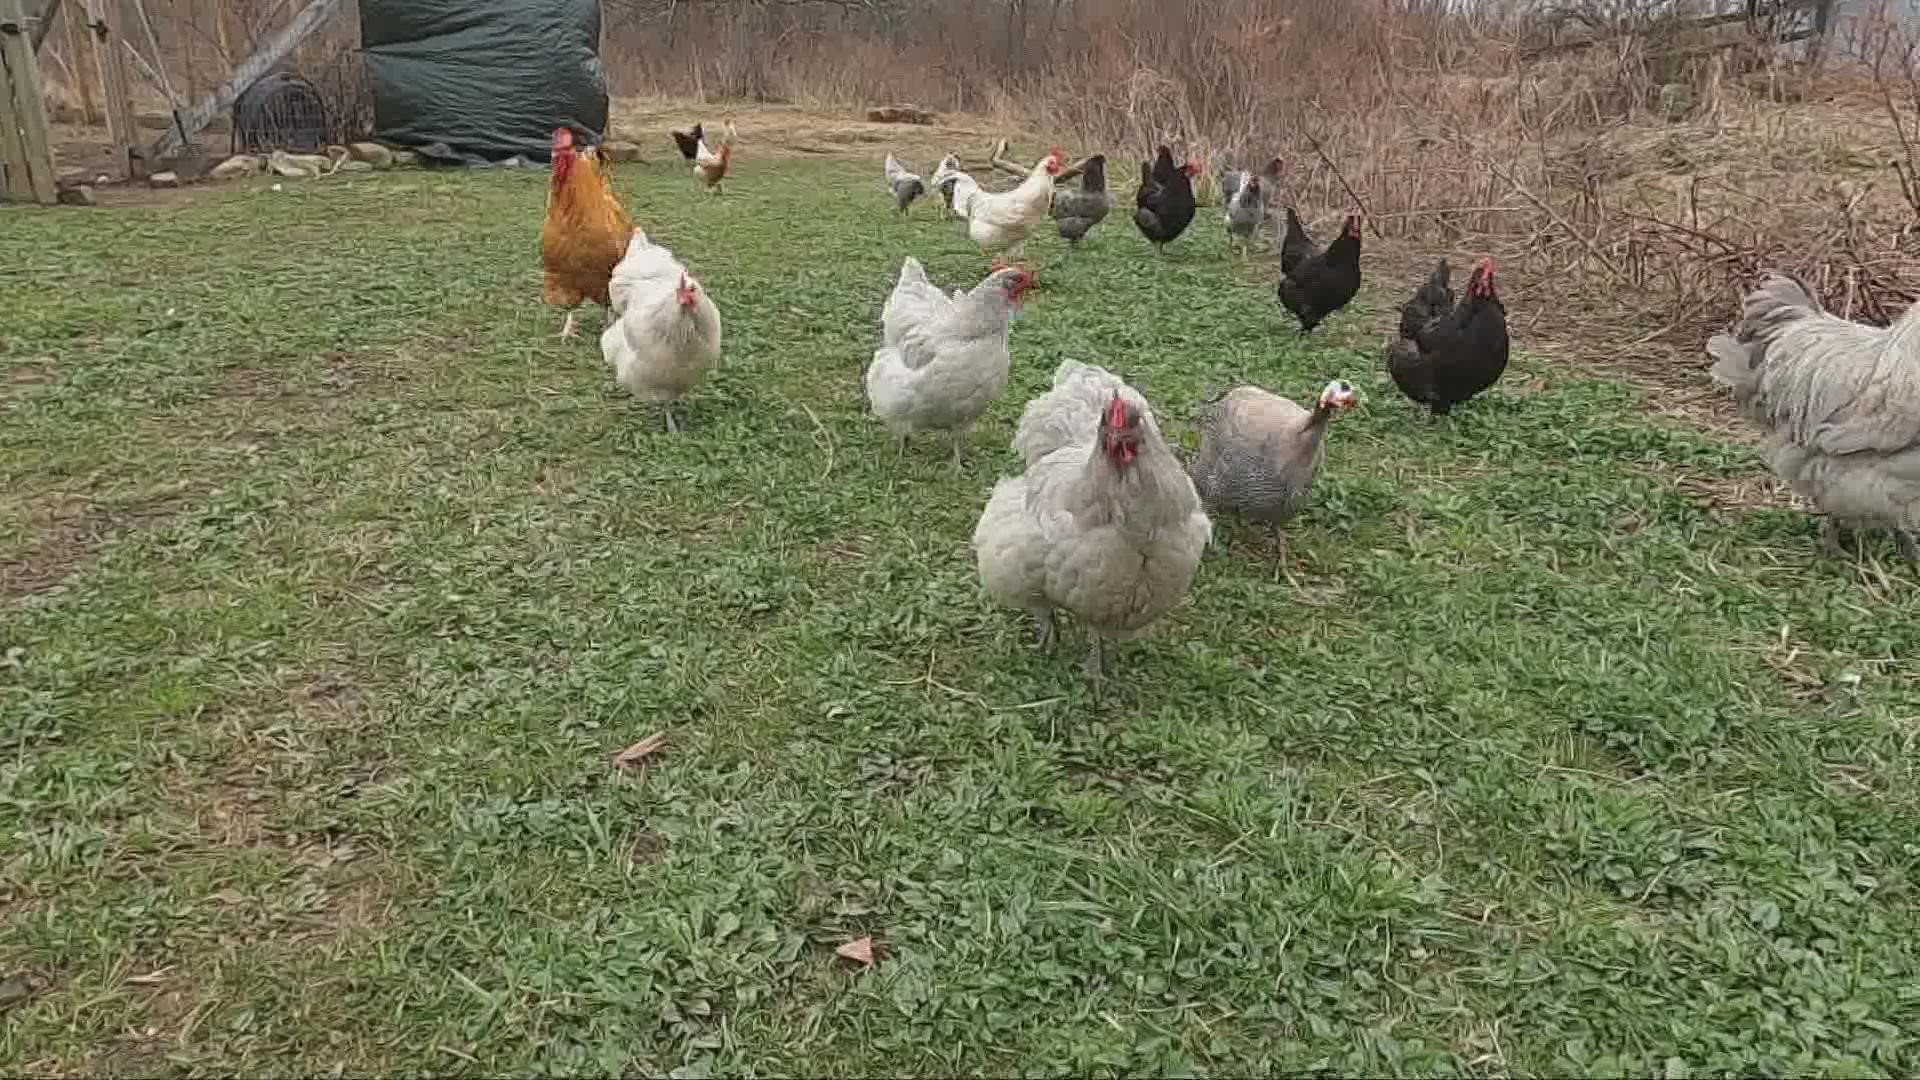 Experts warn farmers to be cautious because the bird flu has been reported in Ohio.